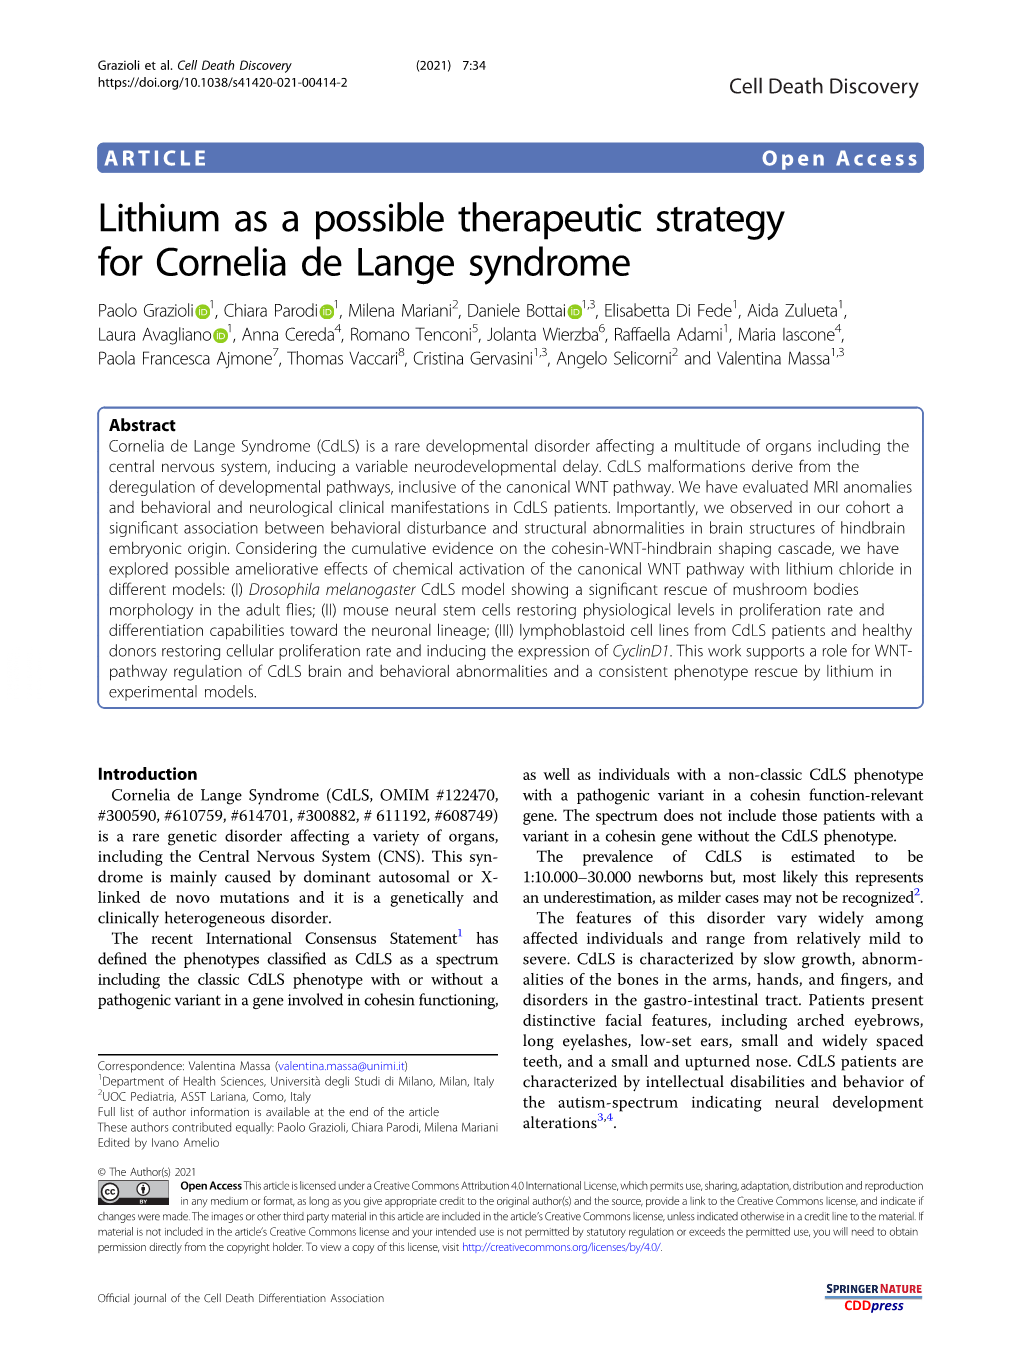 Lithium As a Possible Therapeutic Strategy for Cornelia De Lange Syndrome